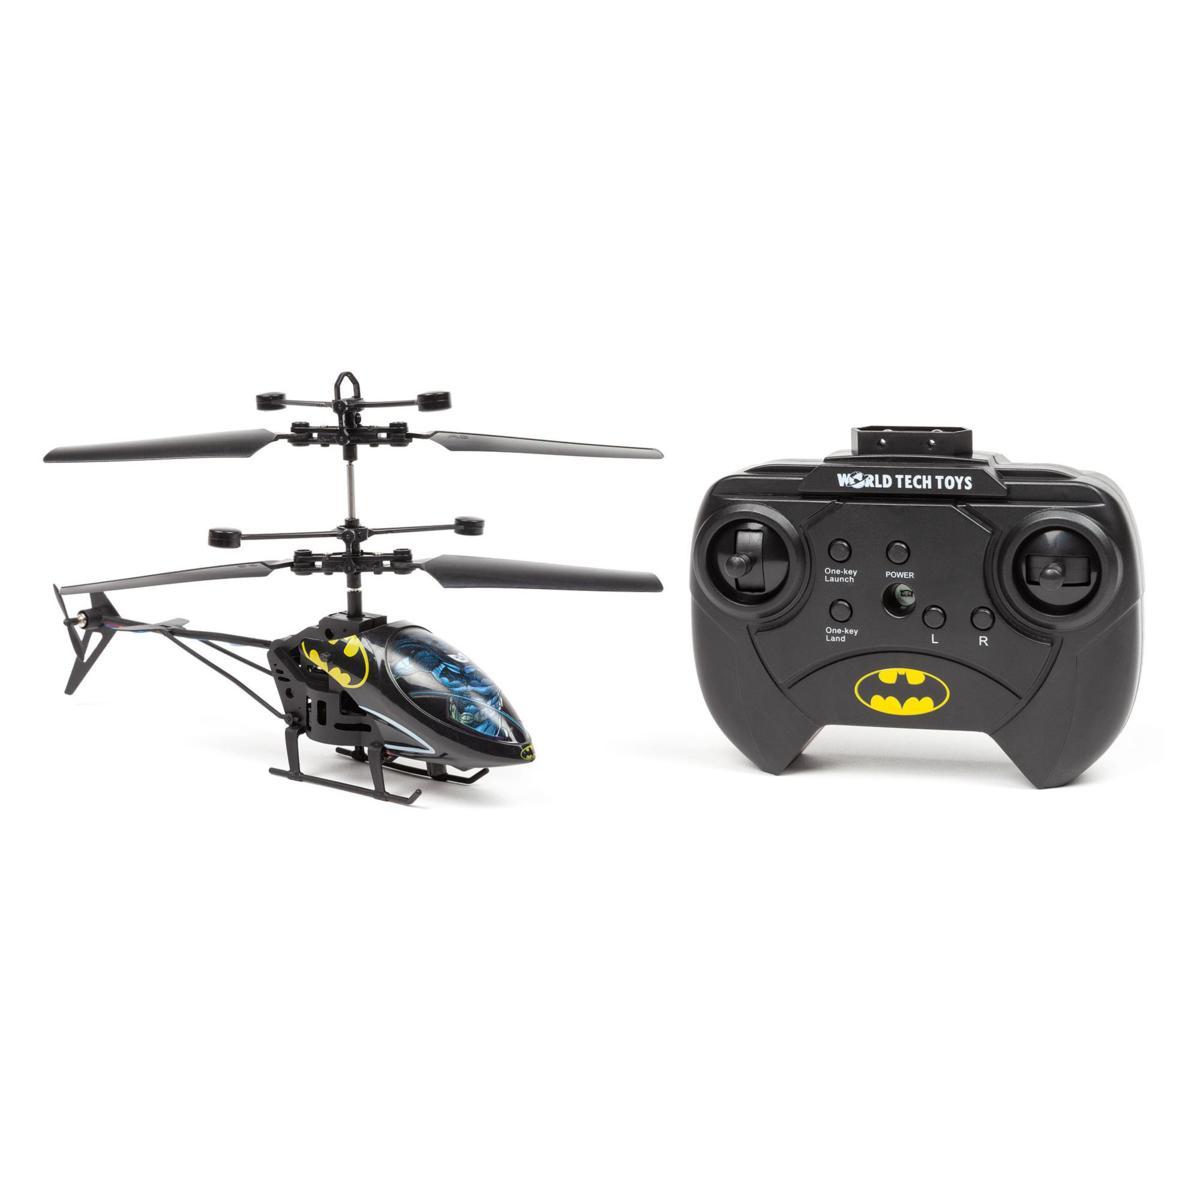 Batman Helicopter Remote Control: Different Ways to Play with a Batman Helicopter Remote Control